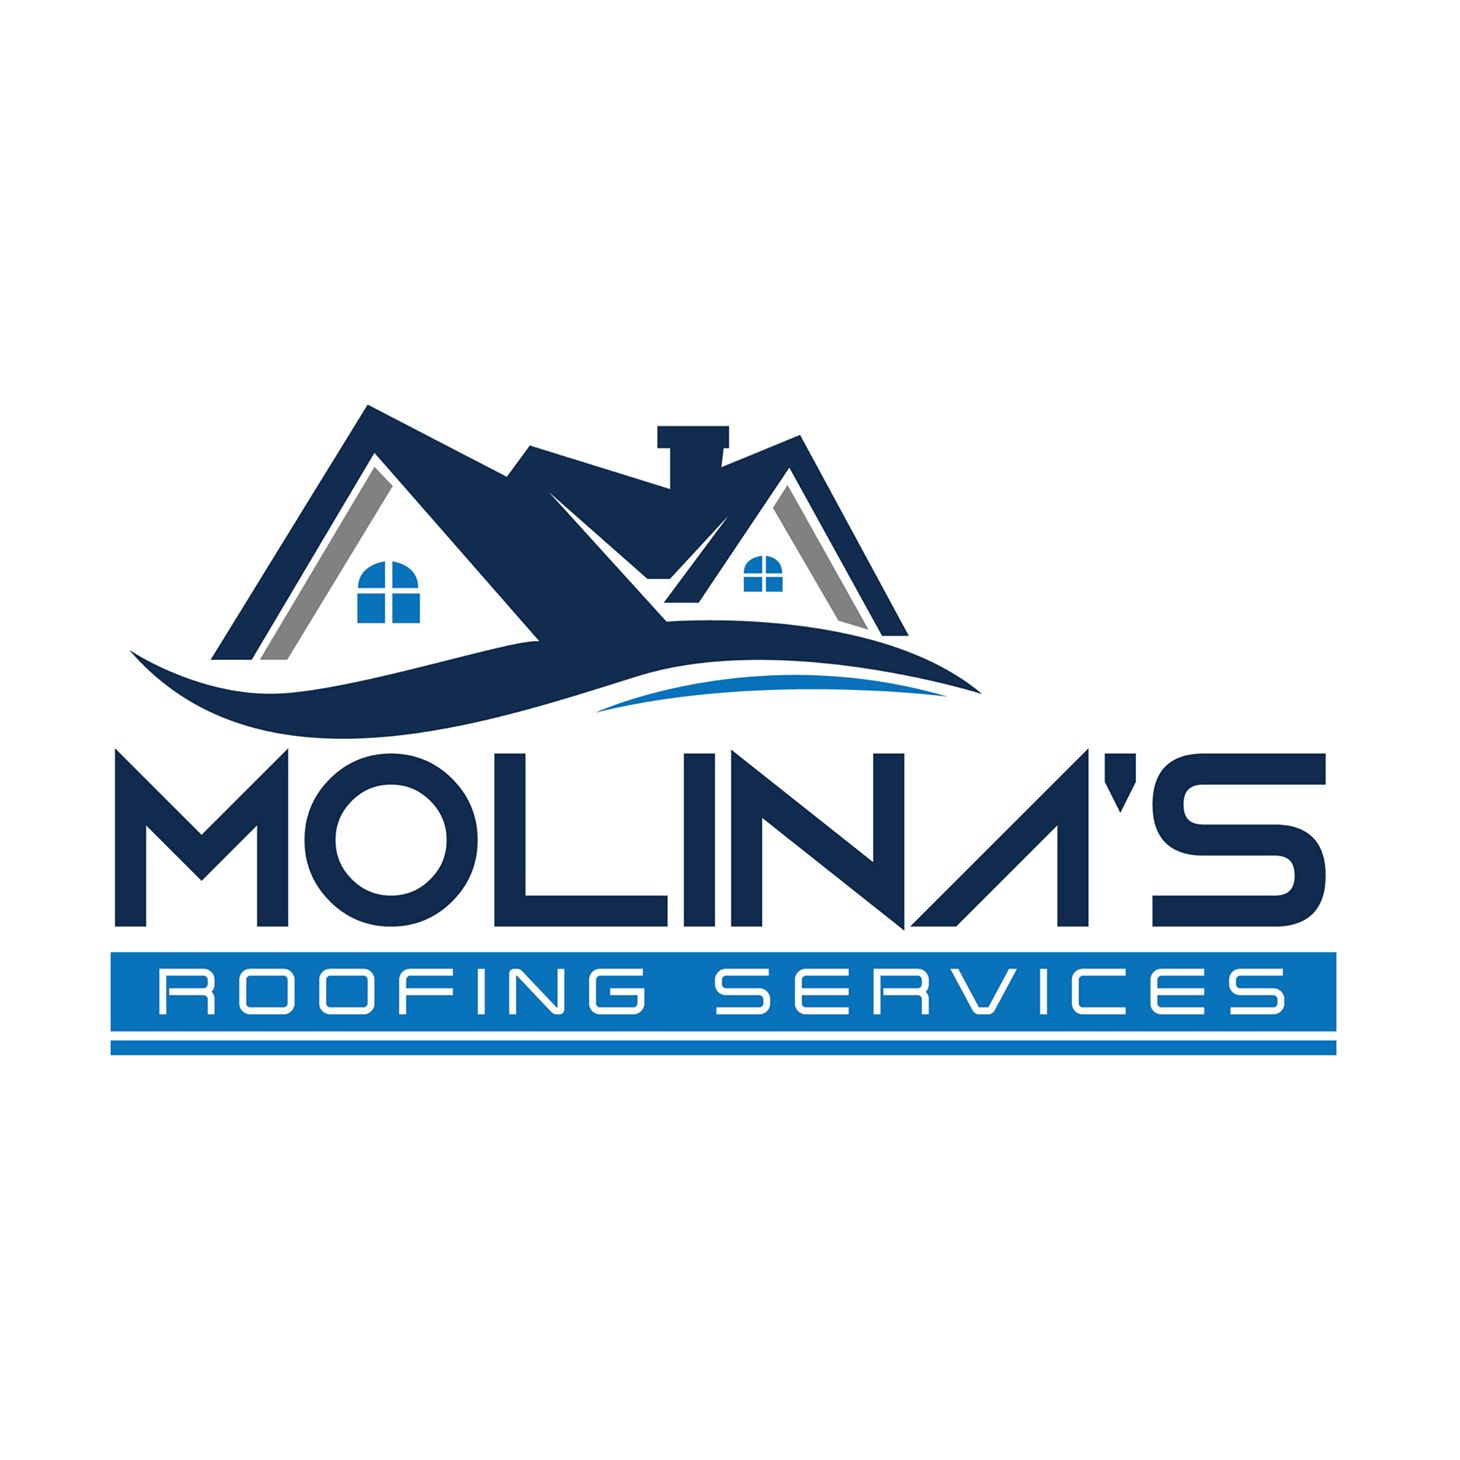 Business logo of Molina's Roofing Services